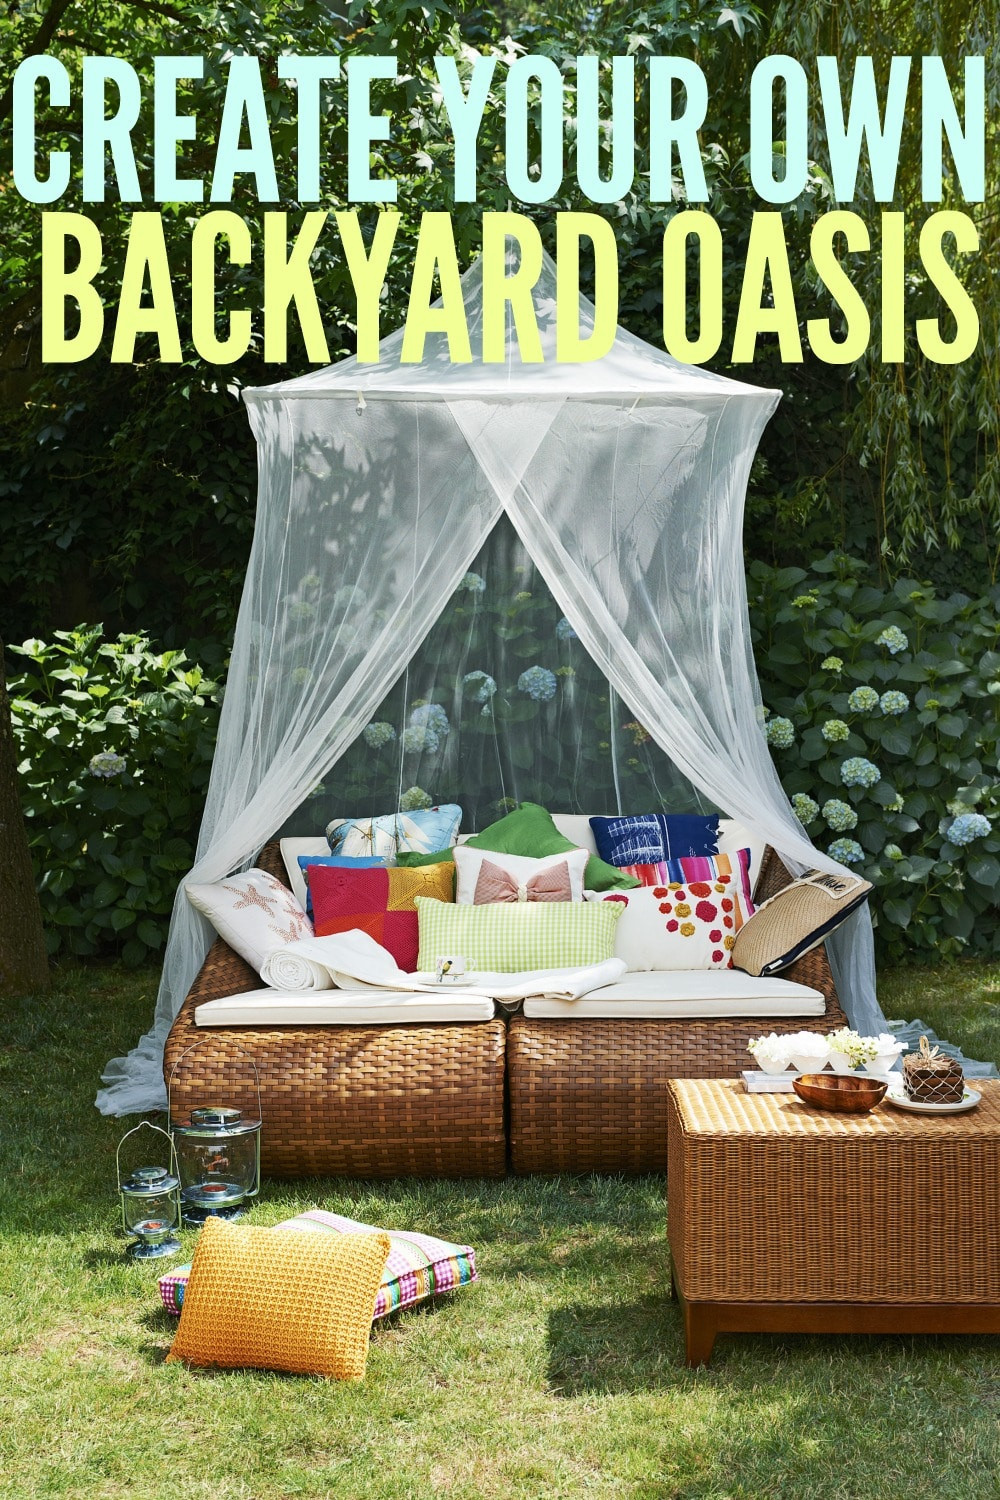 Design Your Own Backyard
 Create Your Own Backyard Oasis For Entertaining and Relaxation